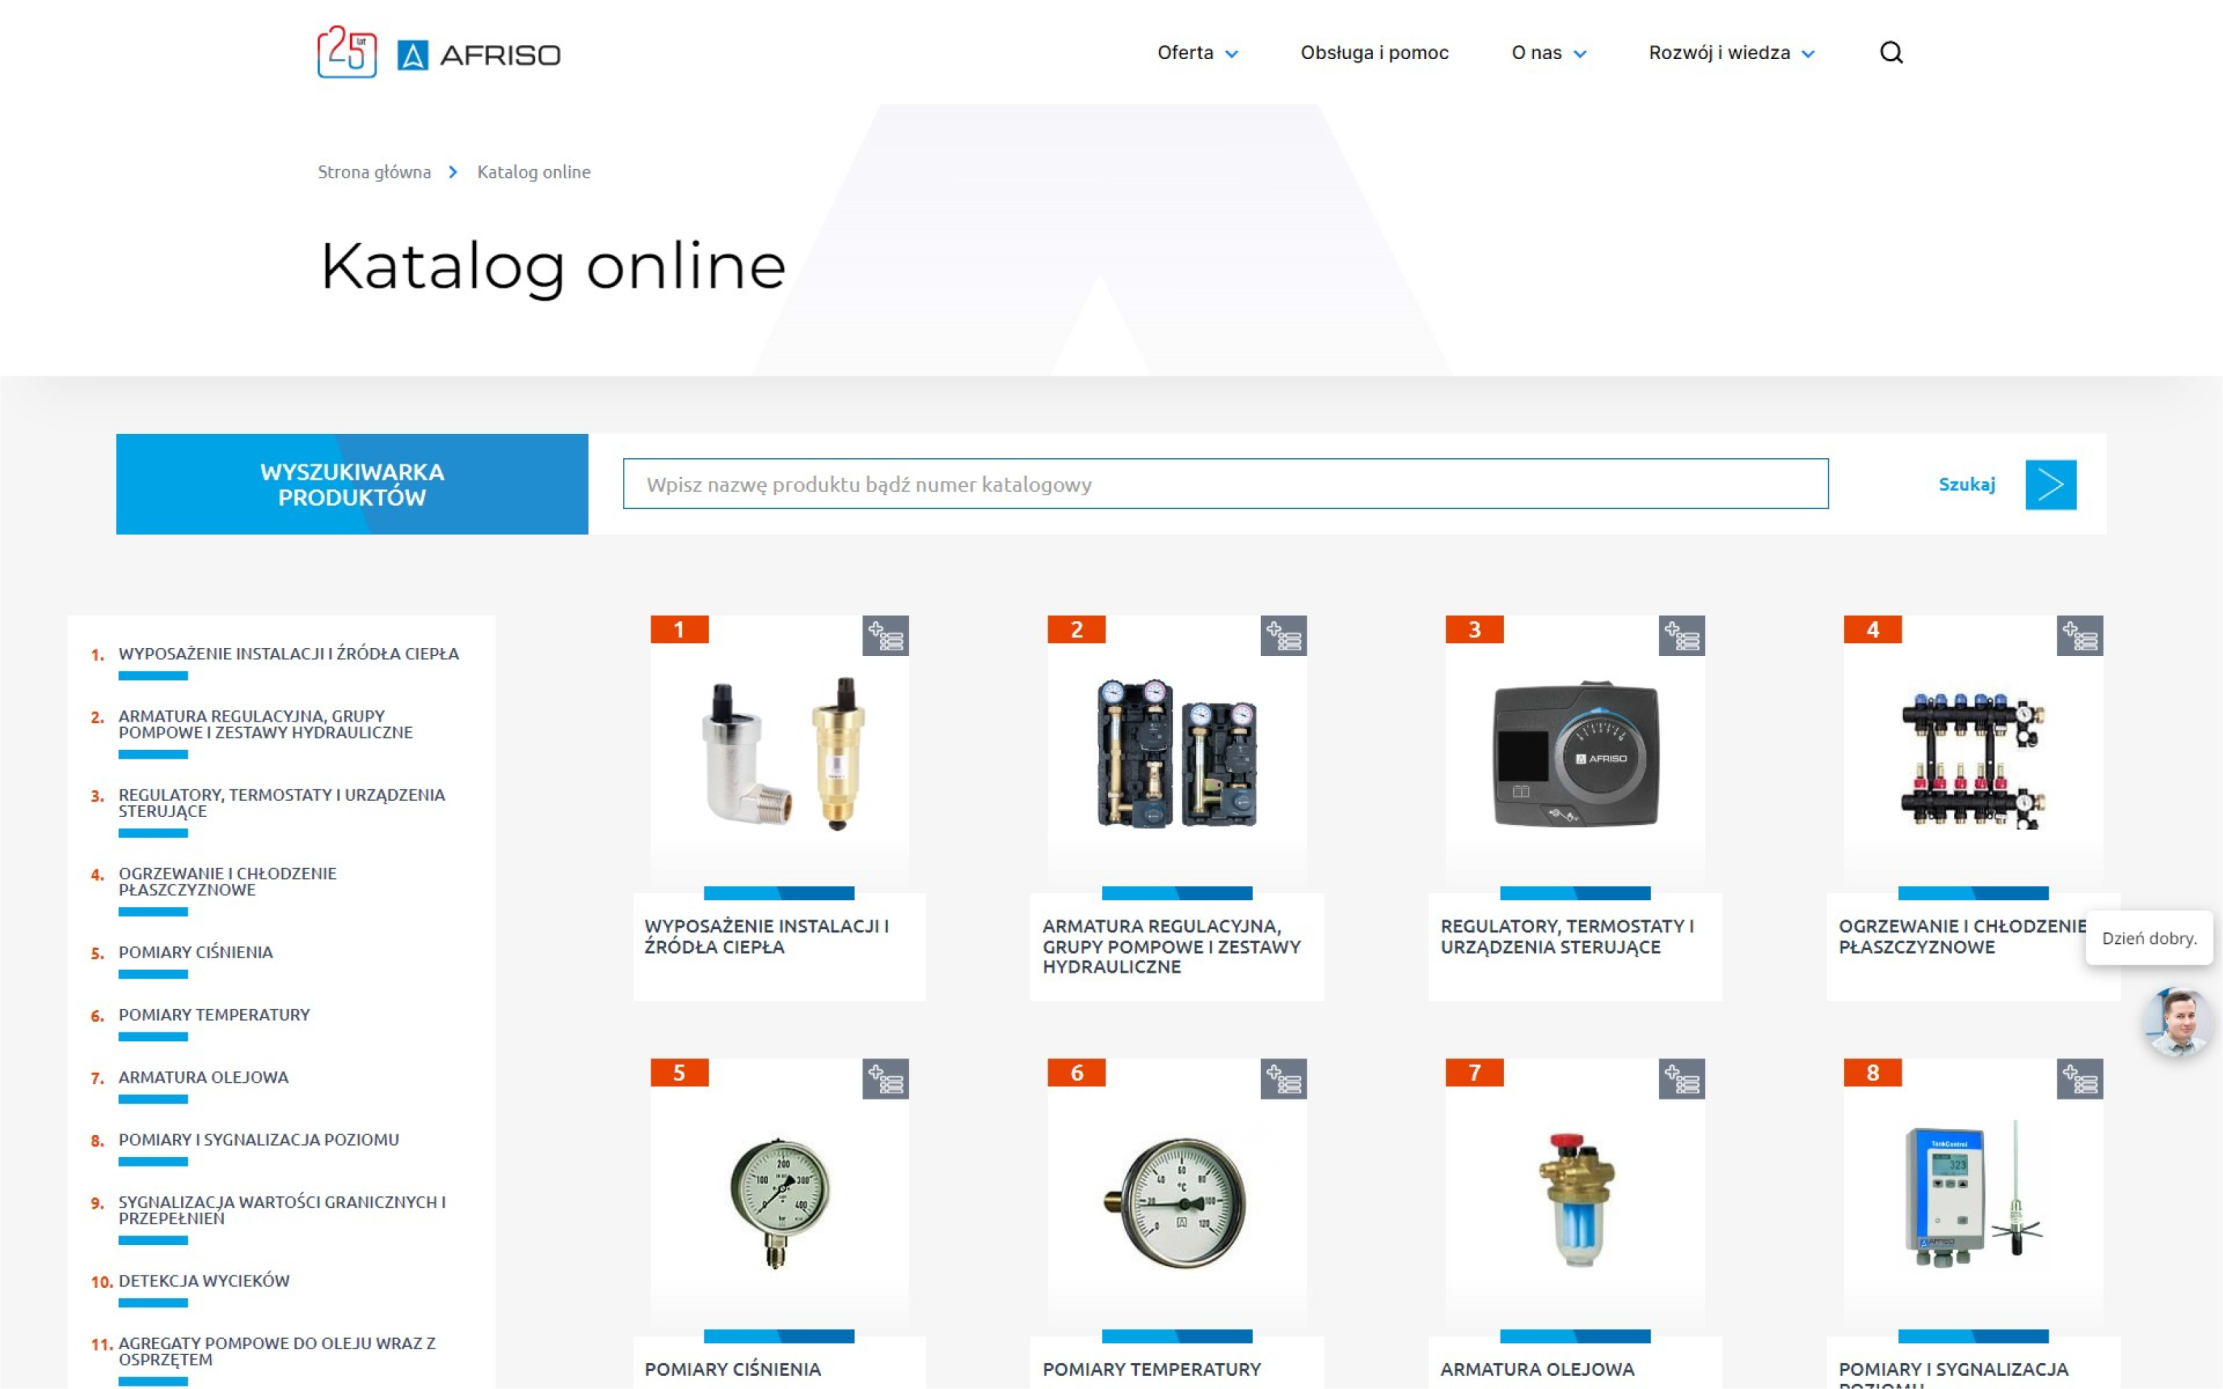 Online catalog page of AFRISO showcasing various precision instruments for heating and plumbing, including search functionality for specific products.